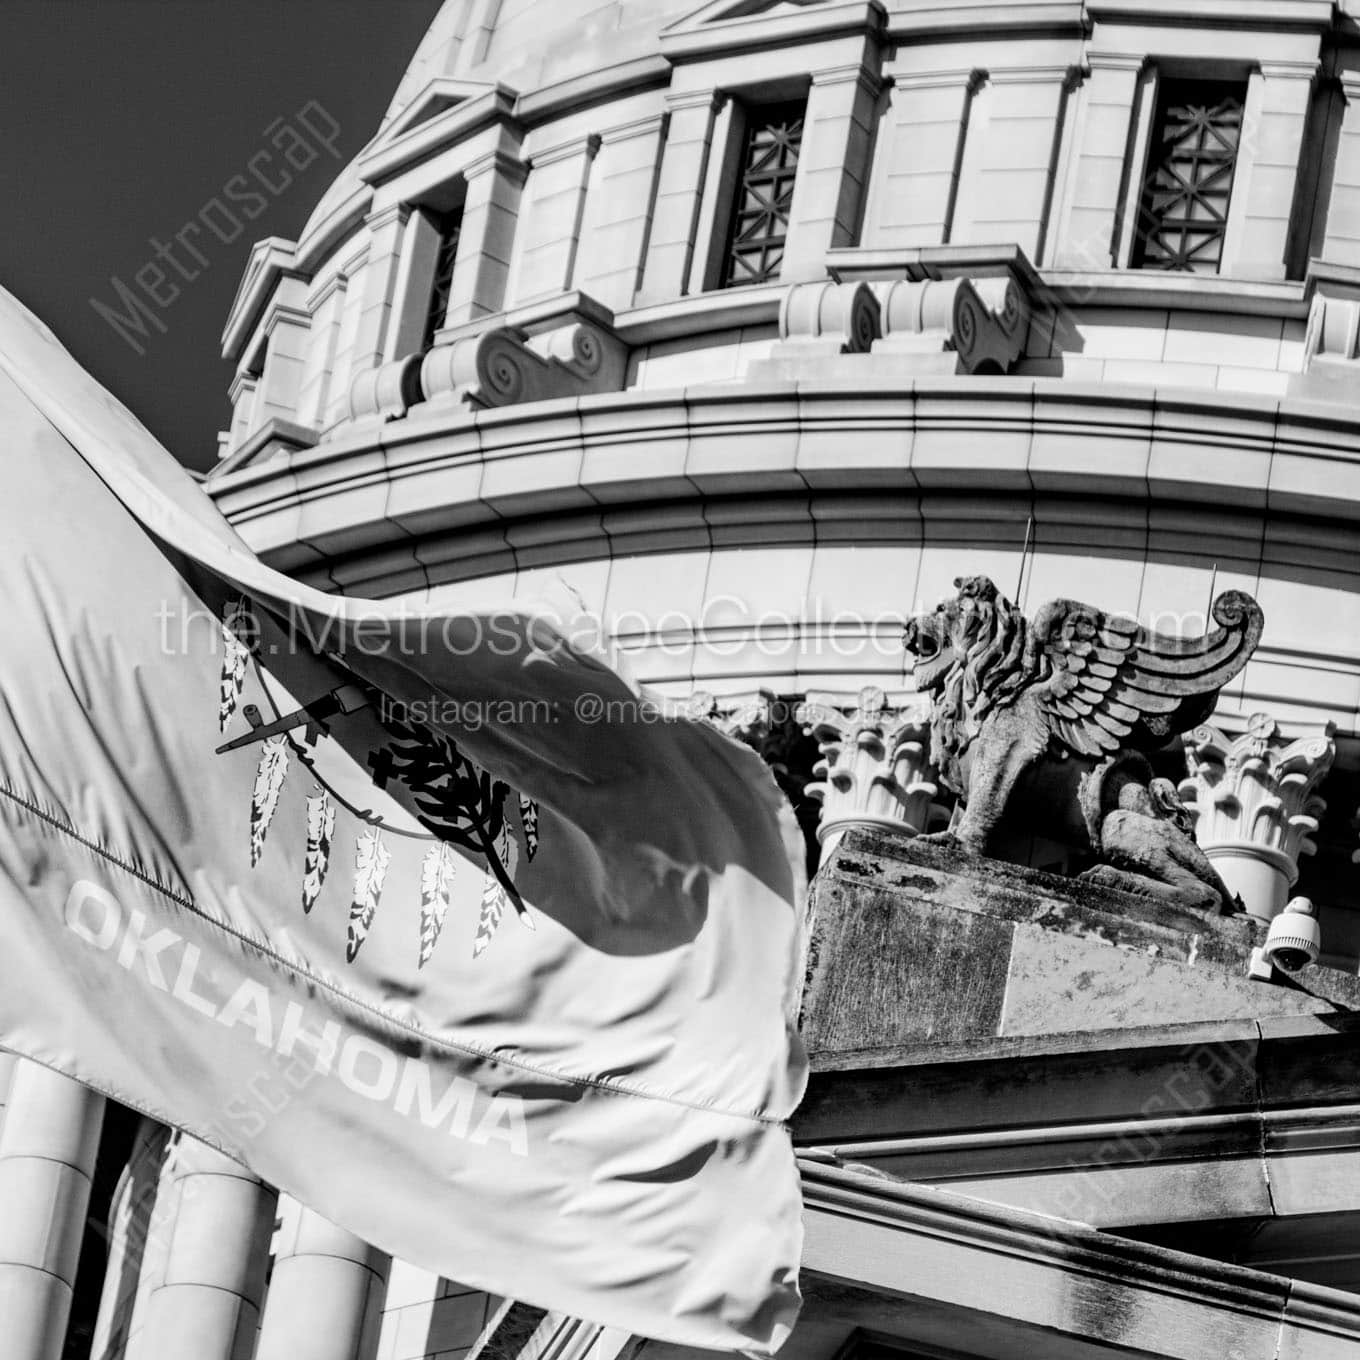 oklahoma flag and griffin on capitol building Black & White Wall Art